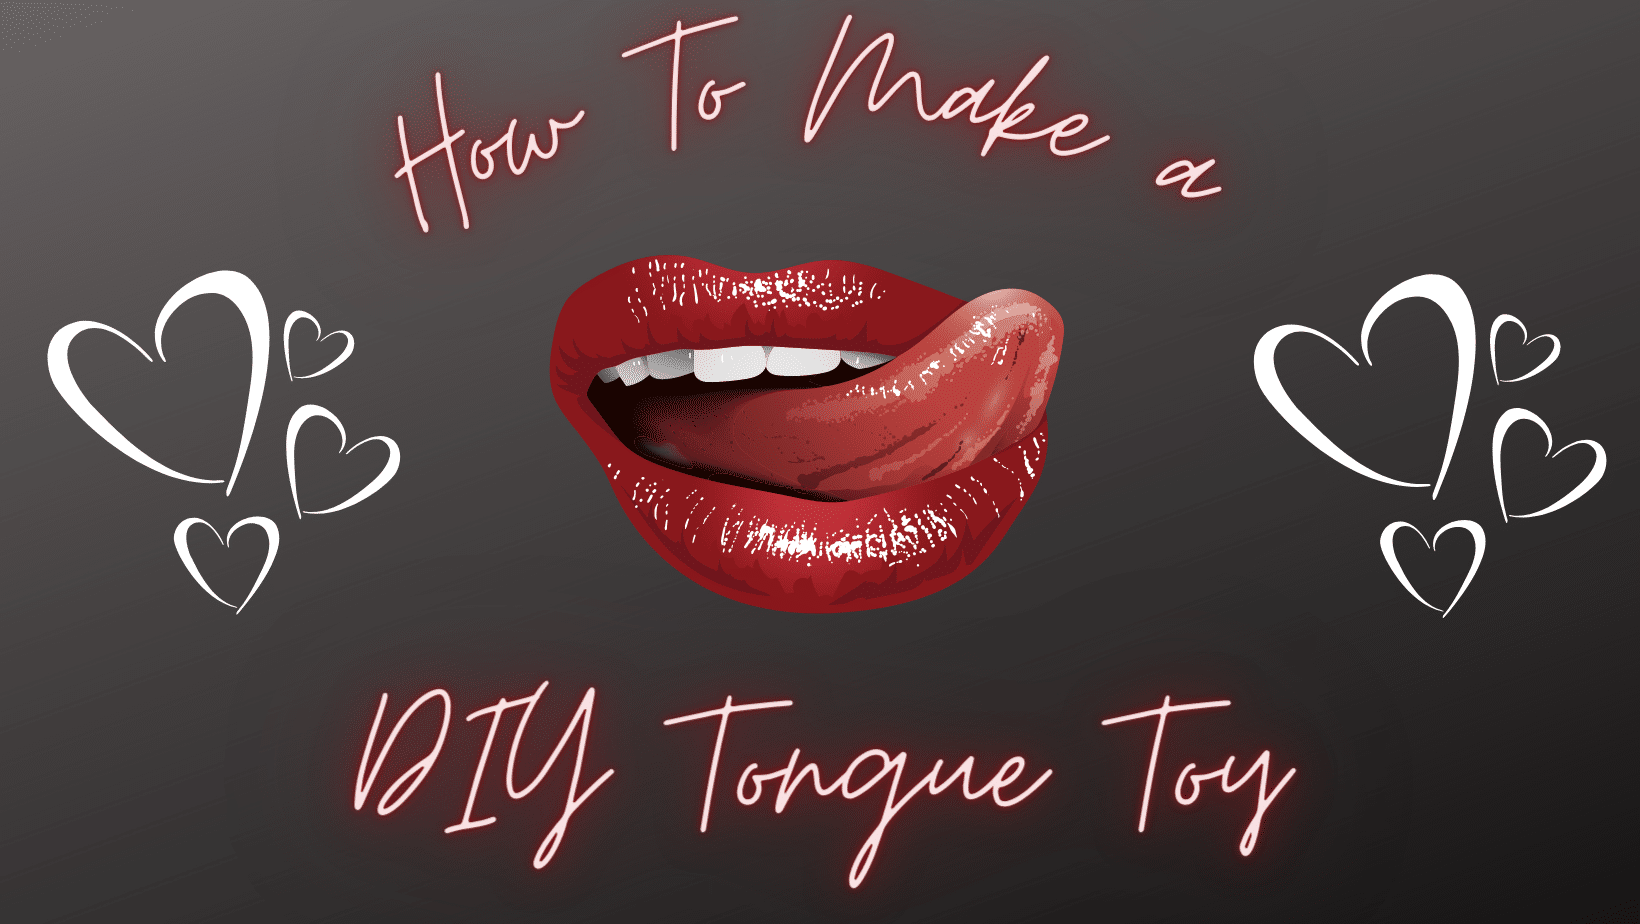 How to Make a DIY Tongue Toy